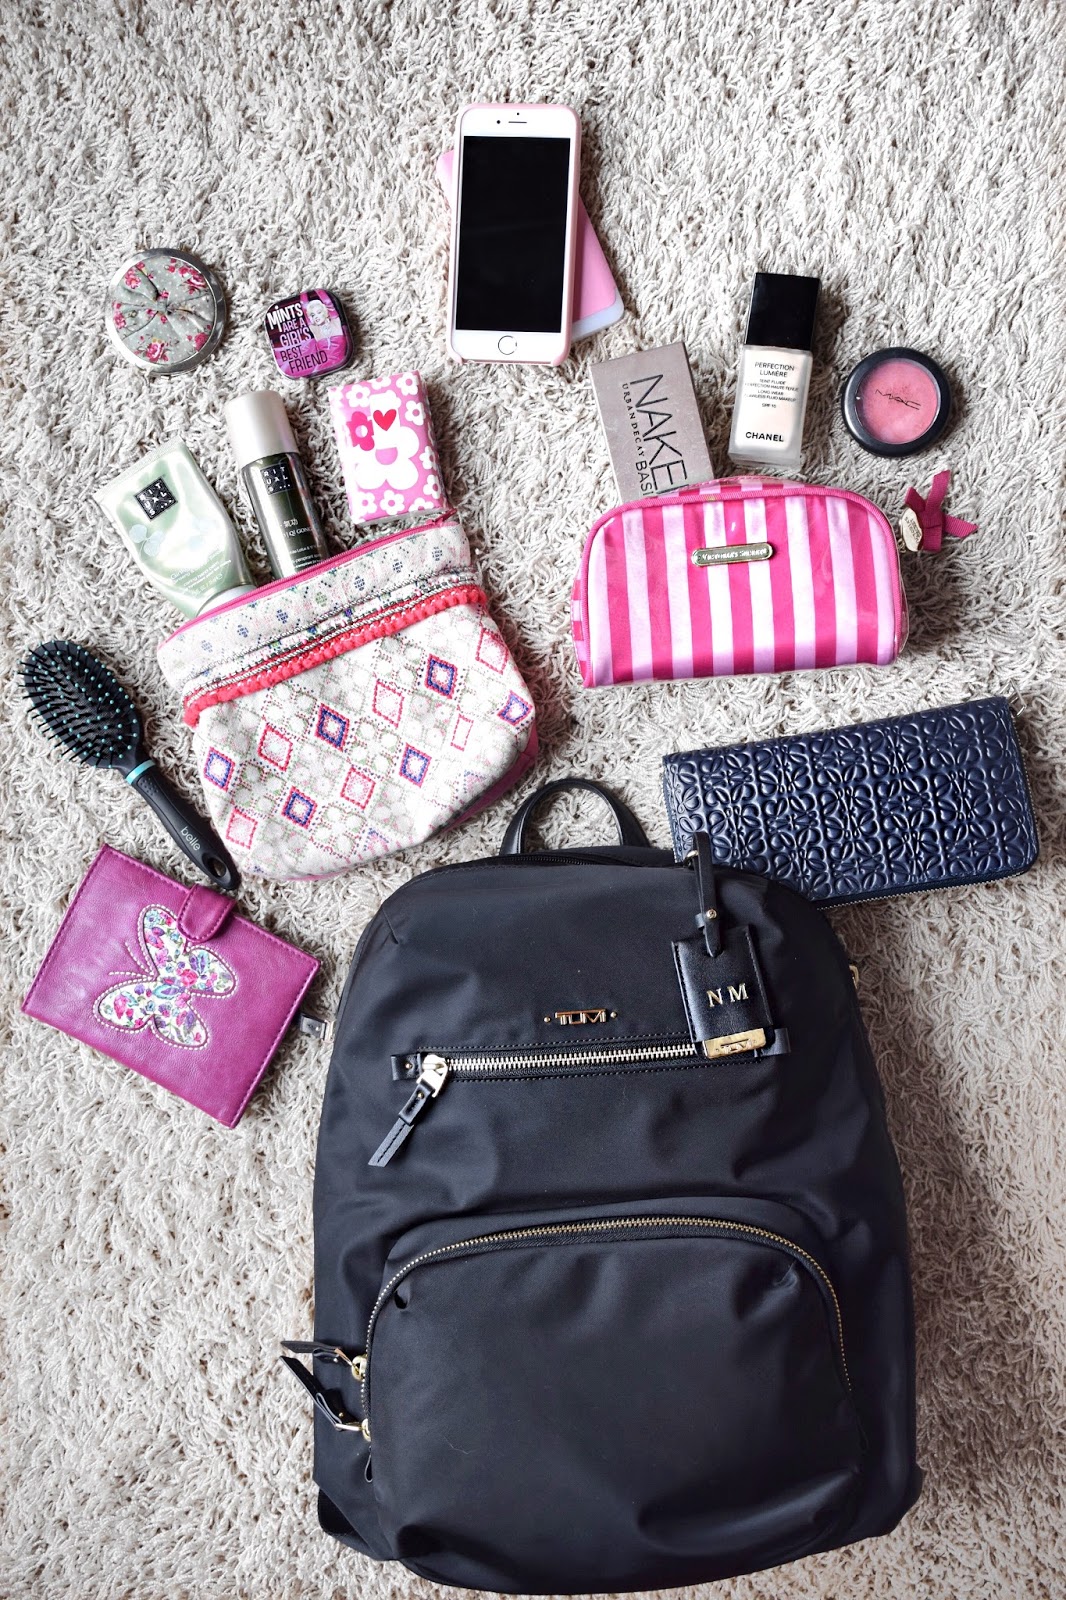 What is in my travel bag?